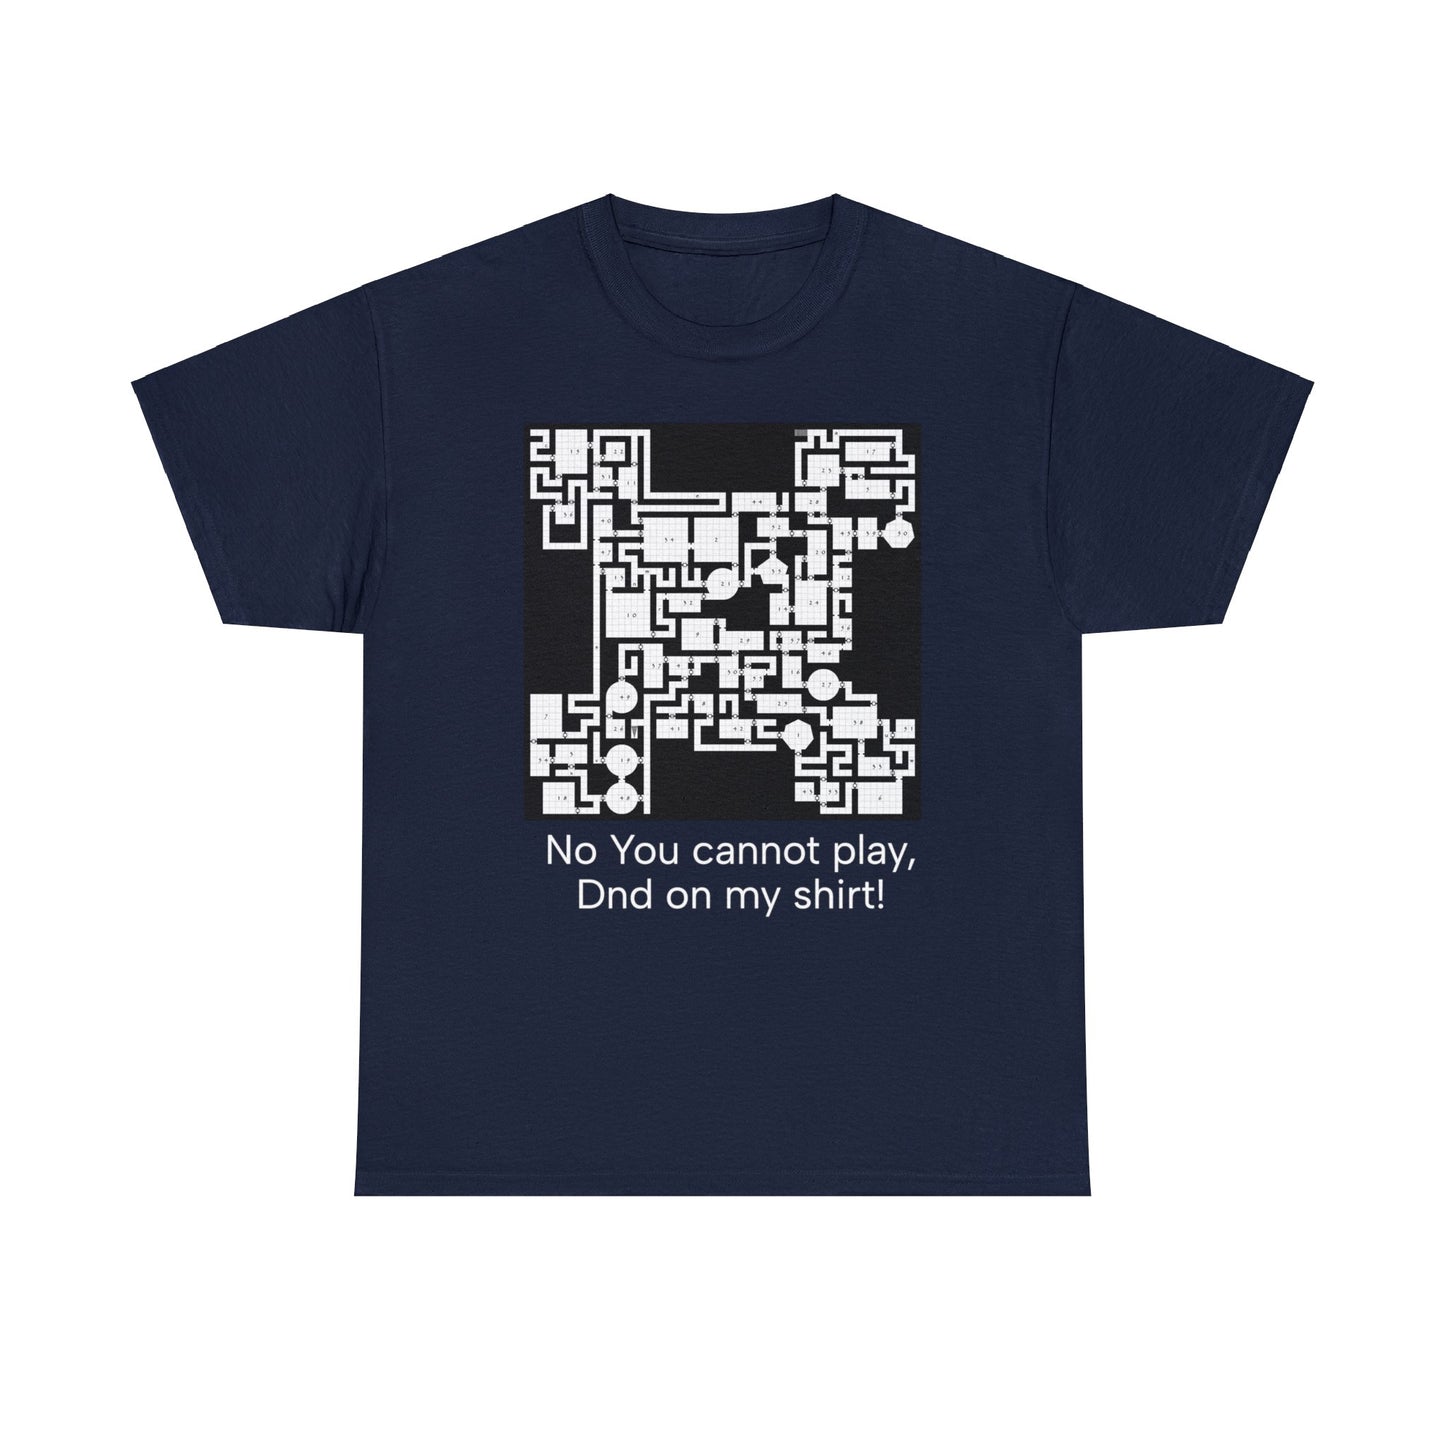 No you cannot play dnd on my shirt Unisex Heavy Cotton Tee-DungeonDice1